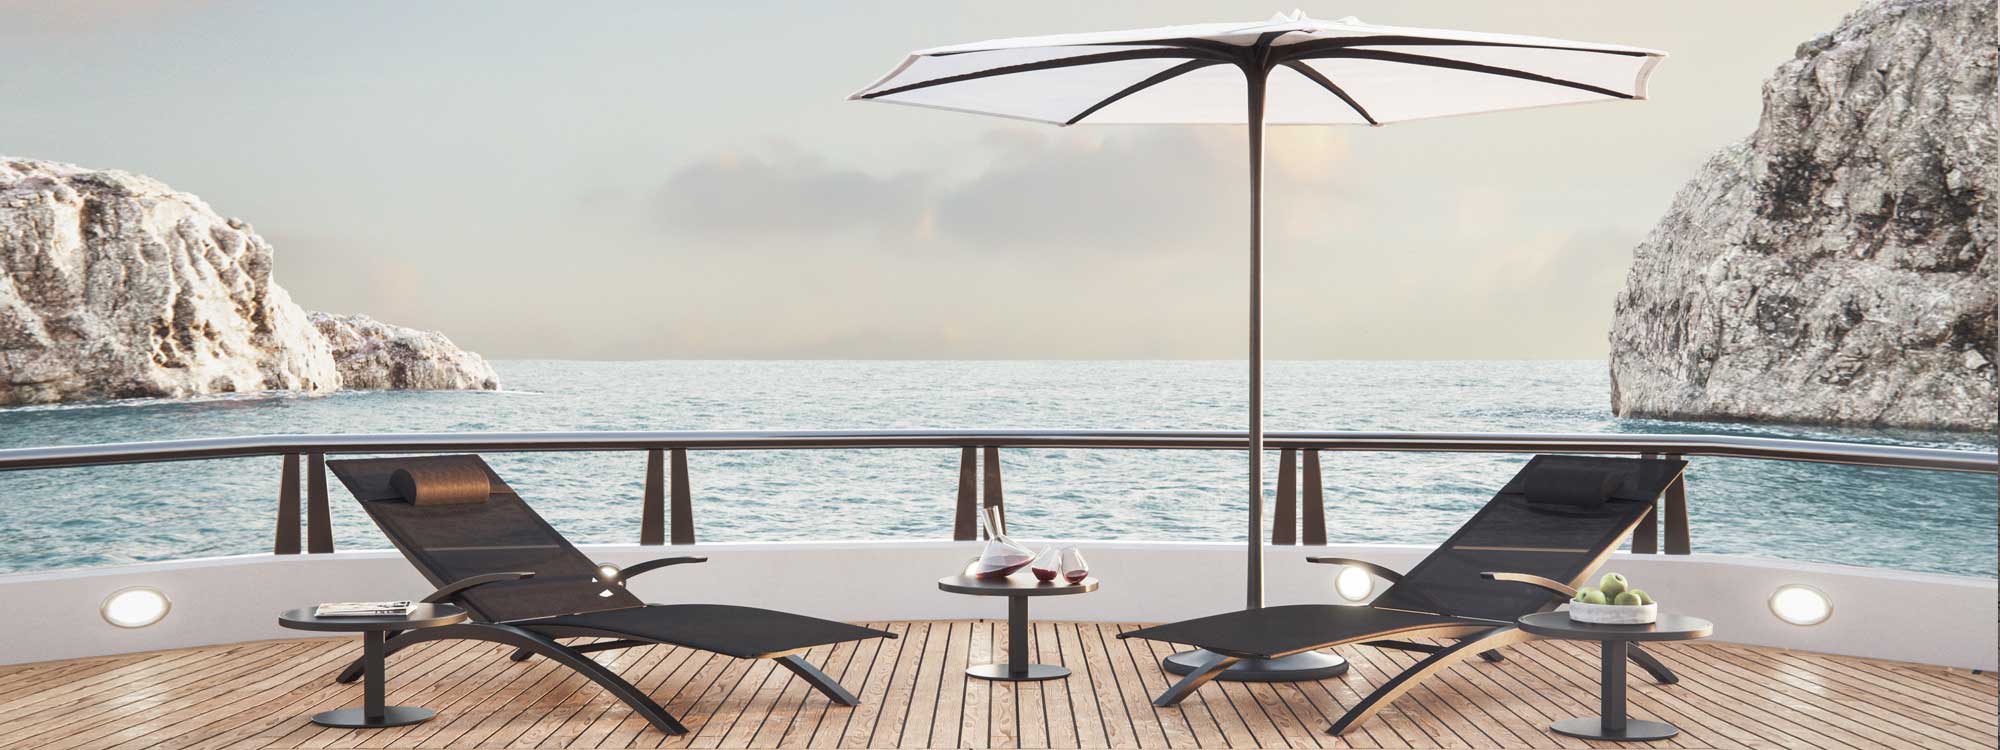 Photo showing O-Zon 50 side table and sun loungers